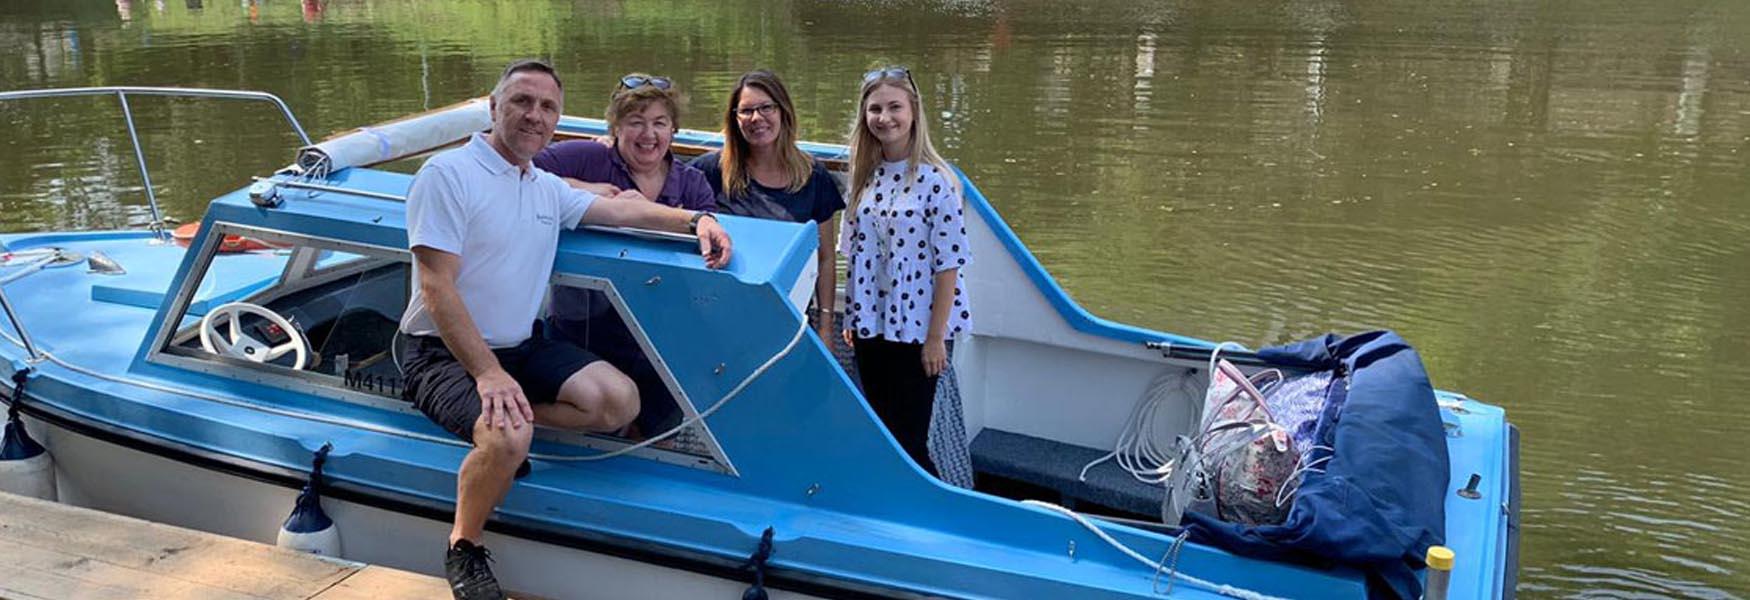 Self-drive boat hire for all the family